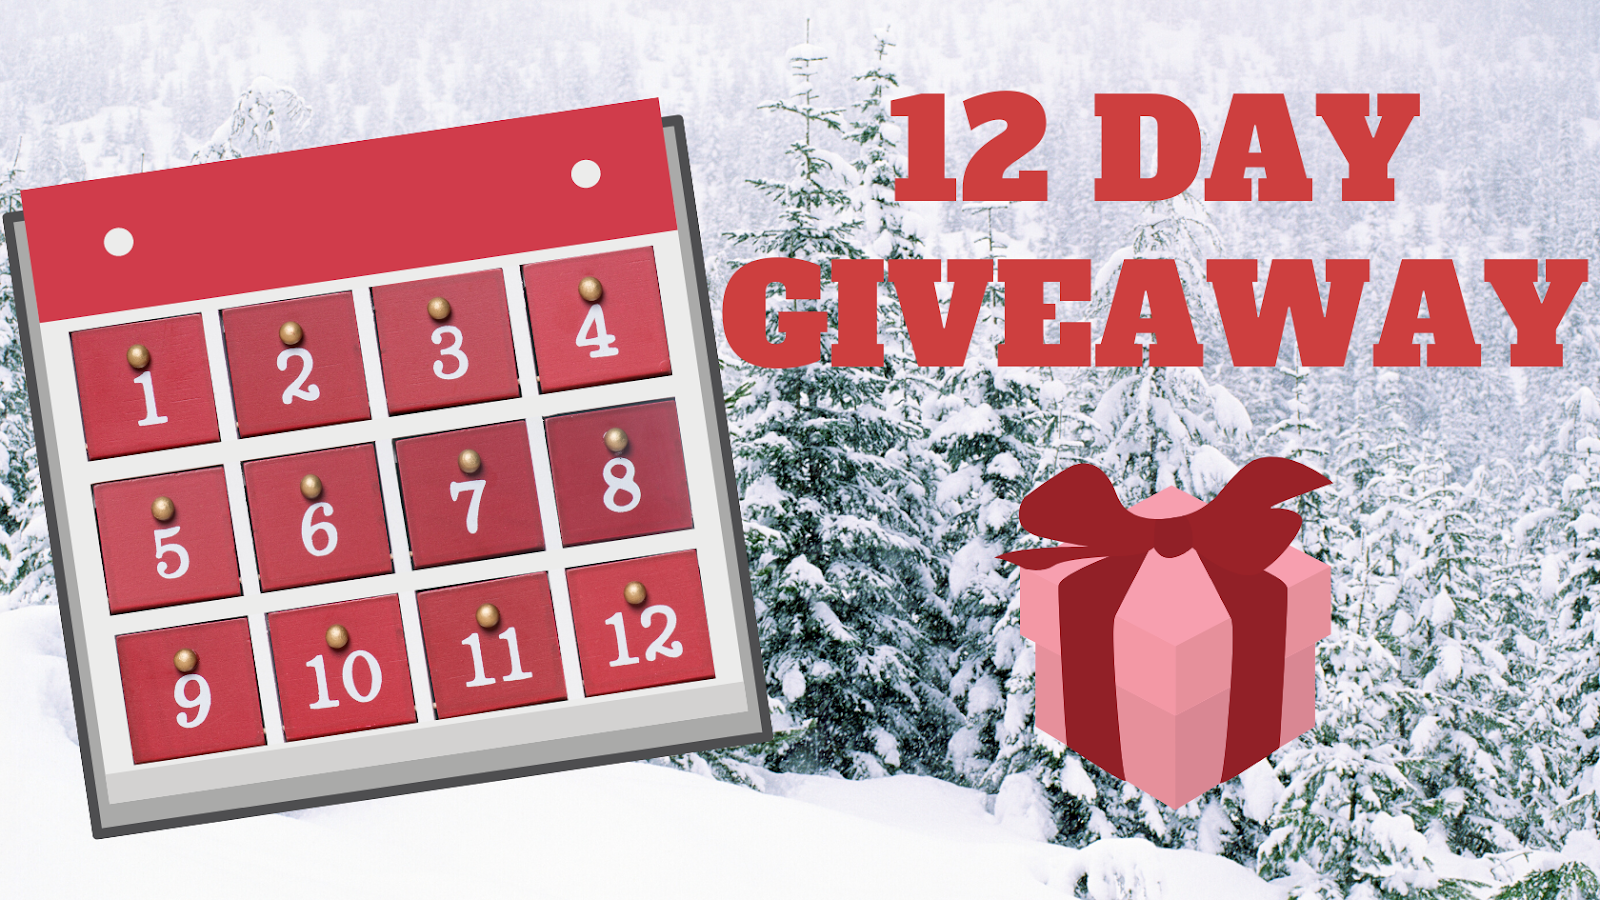 Winter background of trees covered in snow, an image of a calendar with twelve days, text: 12 Day Giveaway, an image of a pink present with a red ribbon